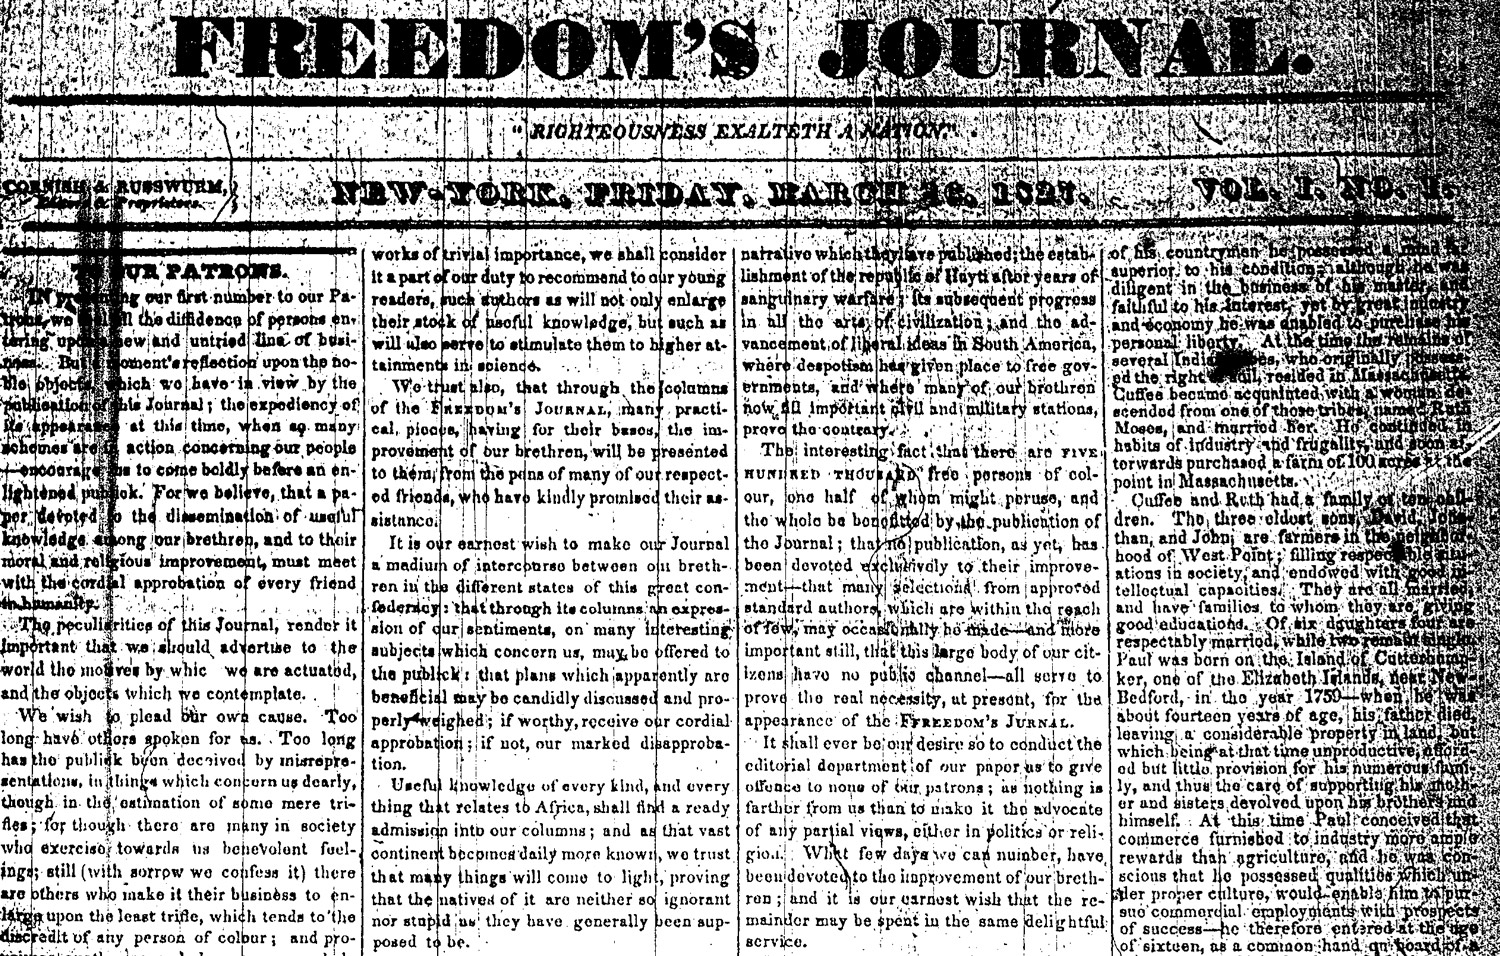 Friday is the 191st anniversary of the first issue of Freedom's Journal, the first black newspaper in the United States. 'Founded by Rev. Peter Williams, Jr. and other free black men in New York City, it was published weekly as a four-page, four-column newspaper, starting with the March 16, 1827 issue. Freedom's Journal circulated in 11 states, the District of Columbia, Haiti, Europe, and Canada,' the Wisconsin Historical Society writes. See the Society's page here, where every issue of the newspaper is preserved and available in (difficult to read) pdfs.